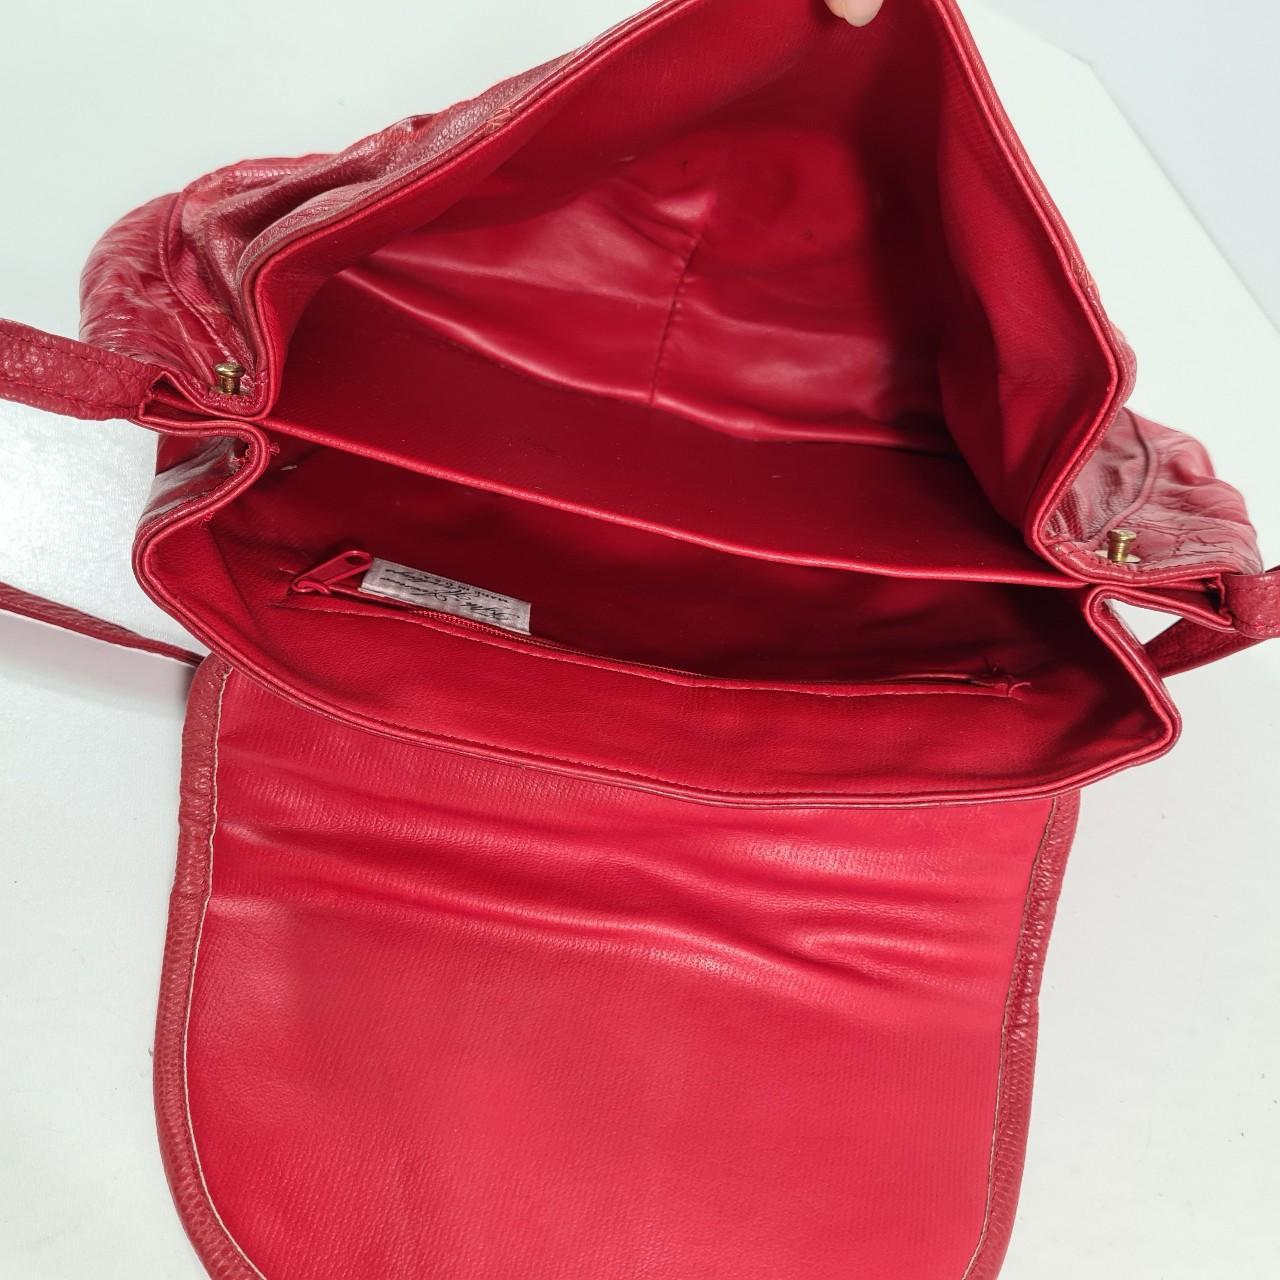 Vintage 80s Fifth Avenue Handbags Red Leather Shoulder Clutch Made USA